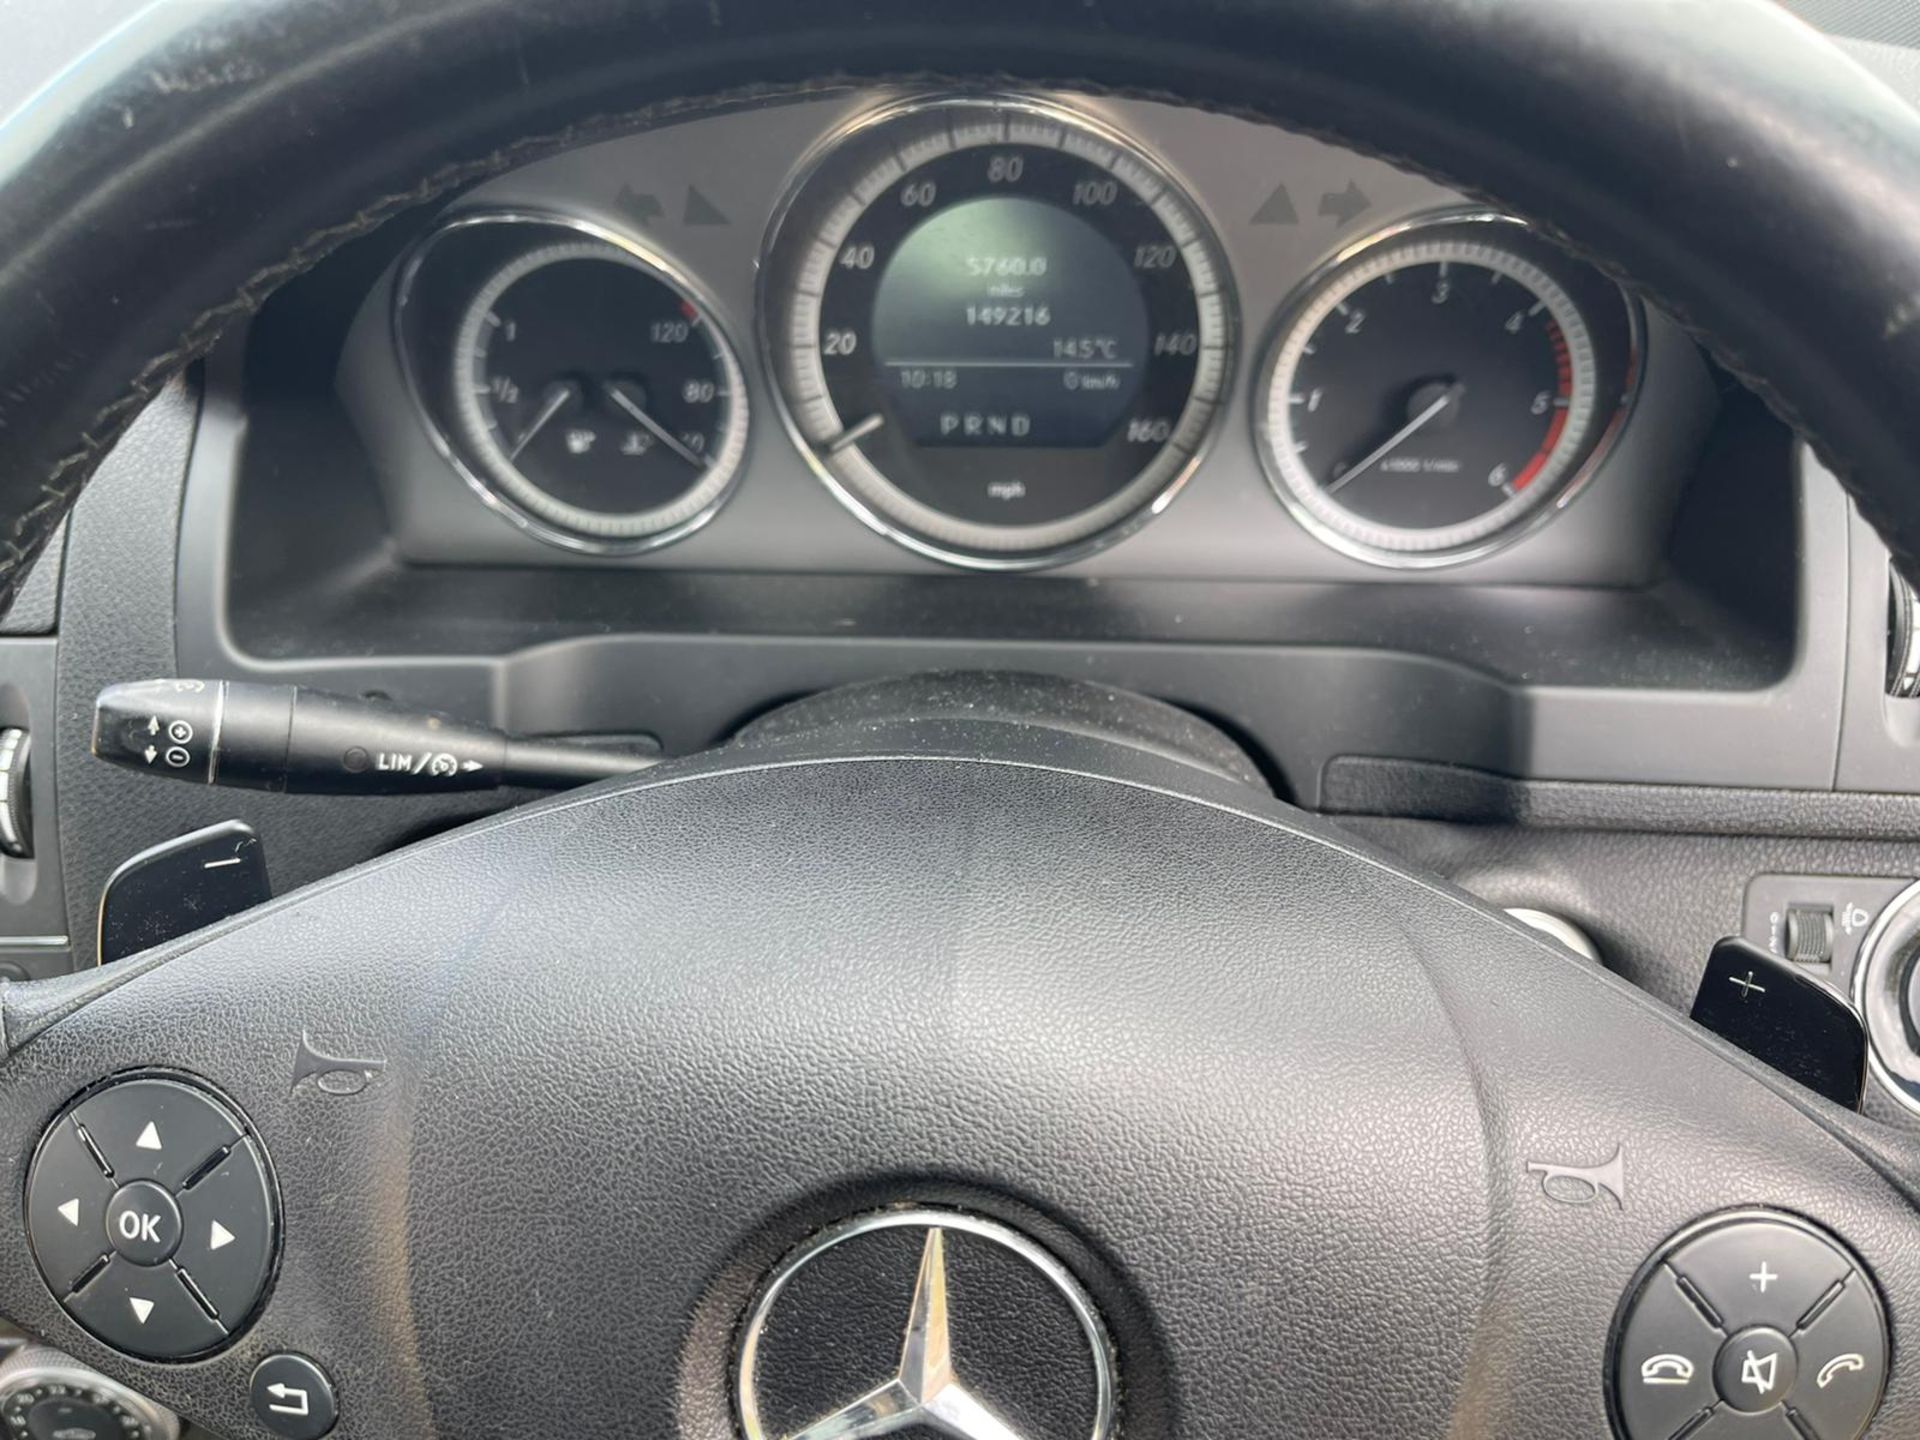 2010 MERCEDES-BENZ C220 BLUEF-CY SPORT CDI A, PANORAMIC ROOF AND PHONE CONNECTIVITY *NO VAT* - Image 10 of 11